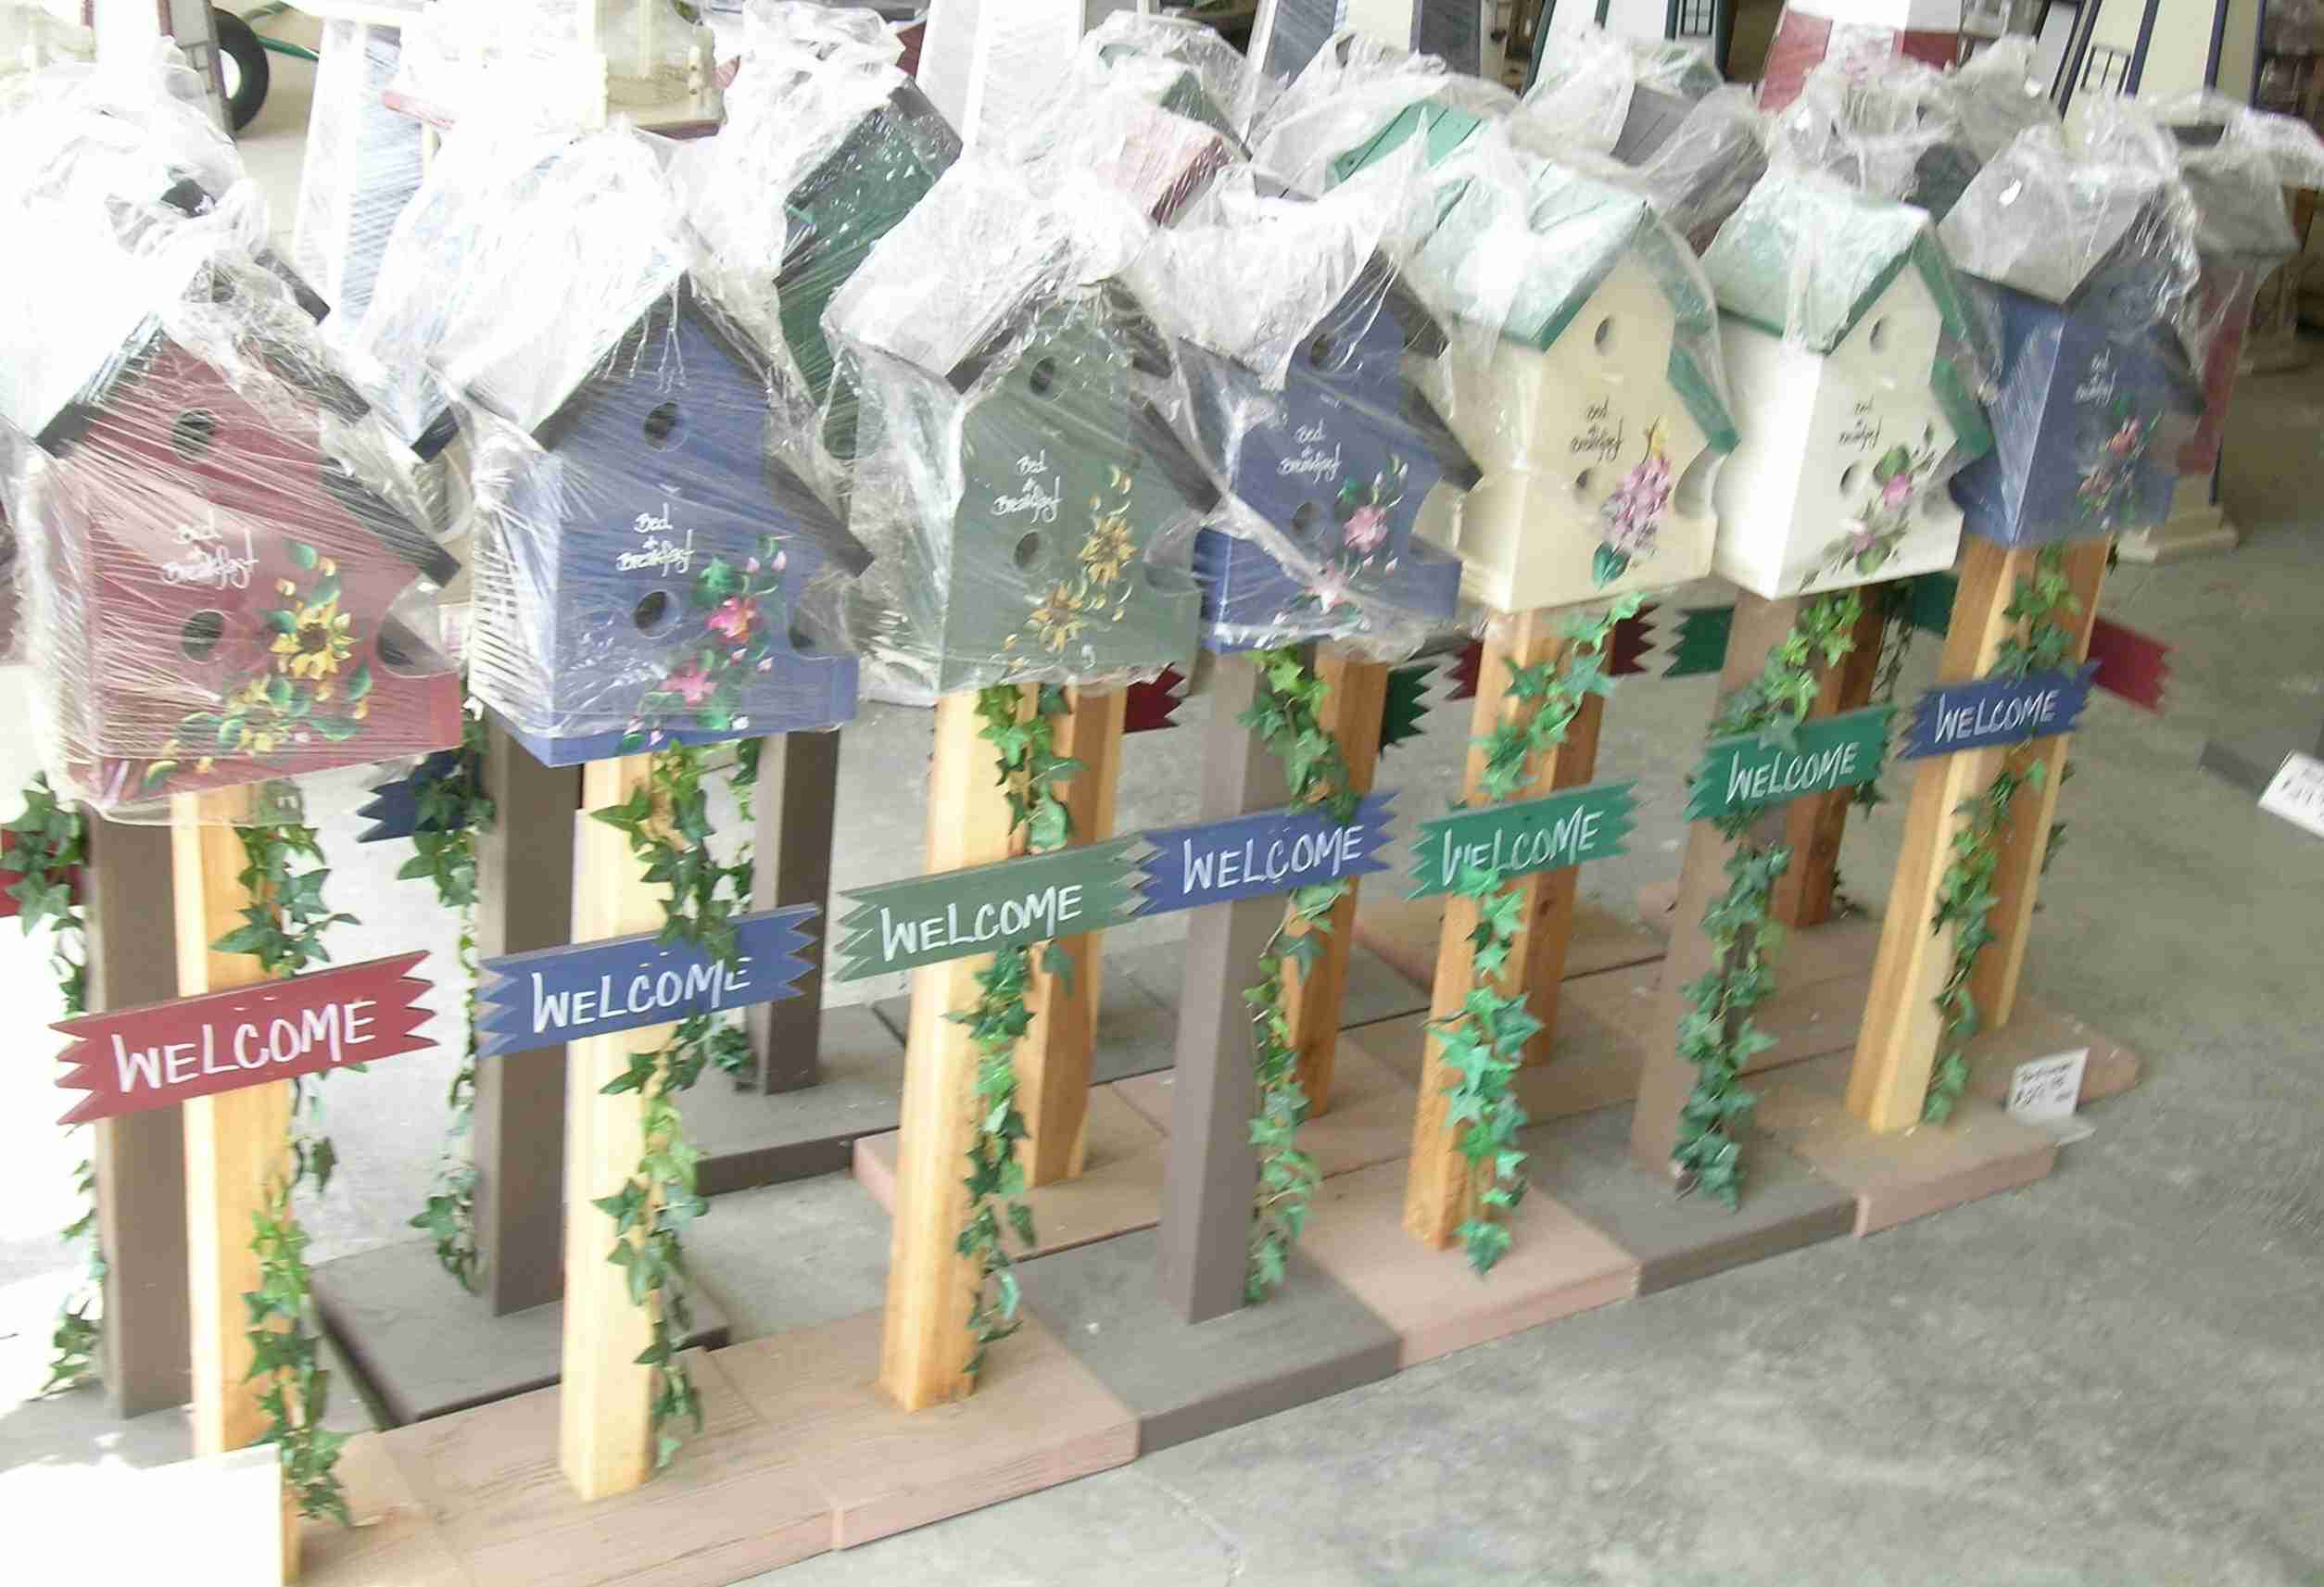 Several rows of birdhouses covered in plastic to keep the dust off